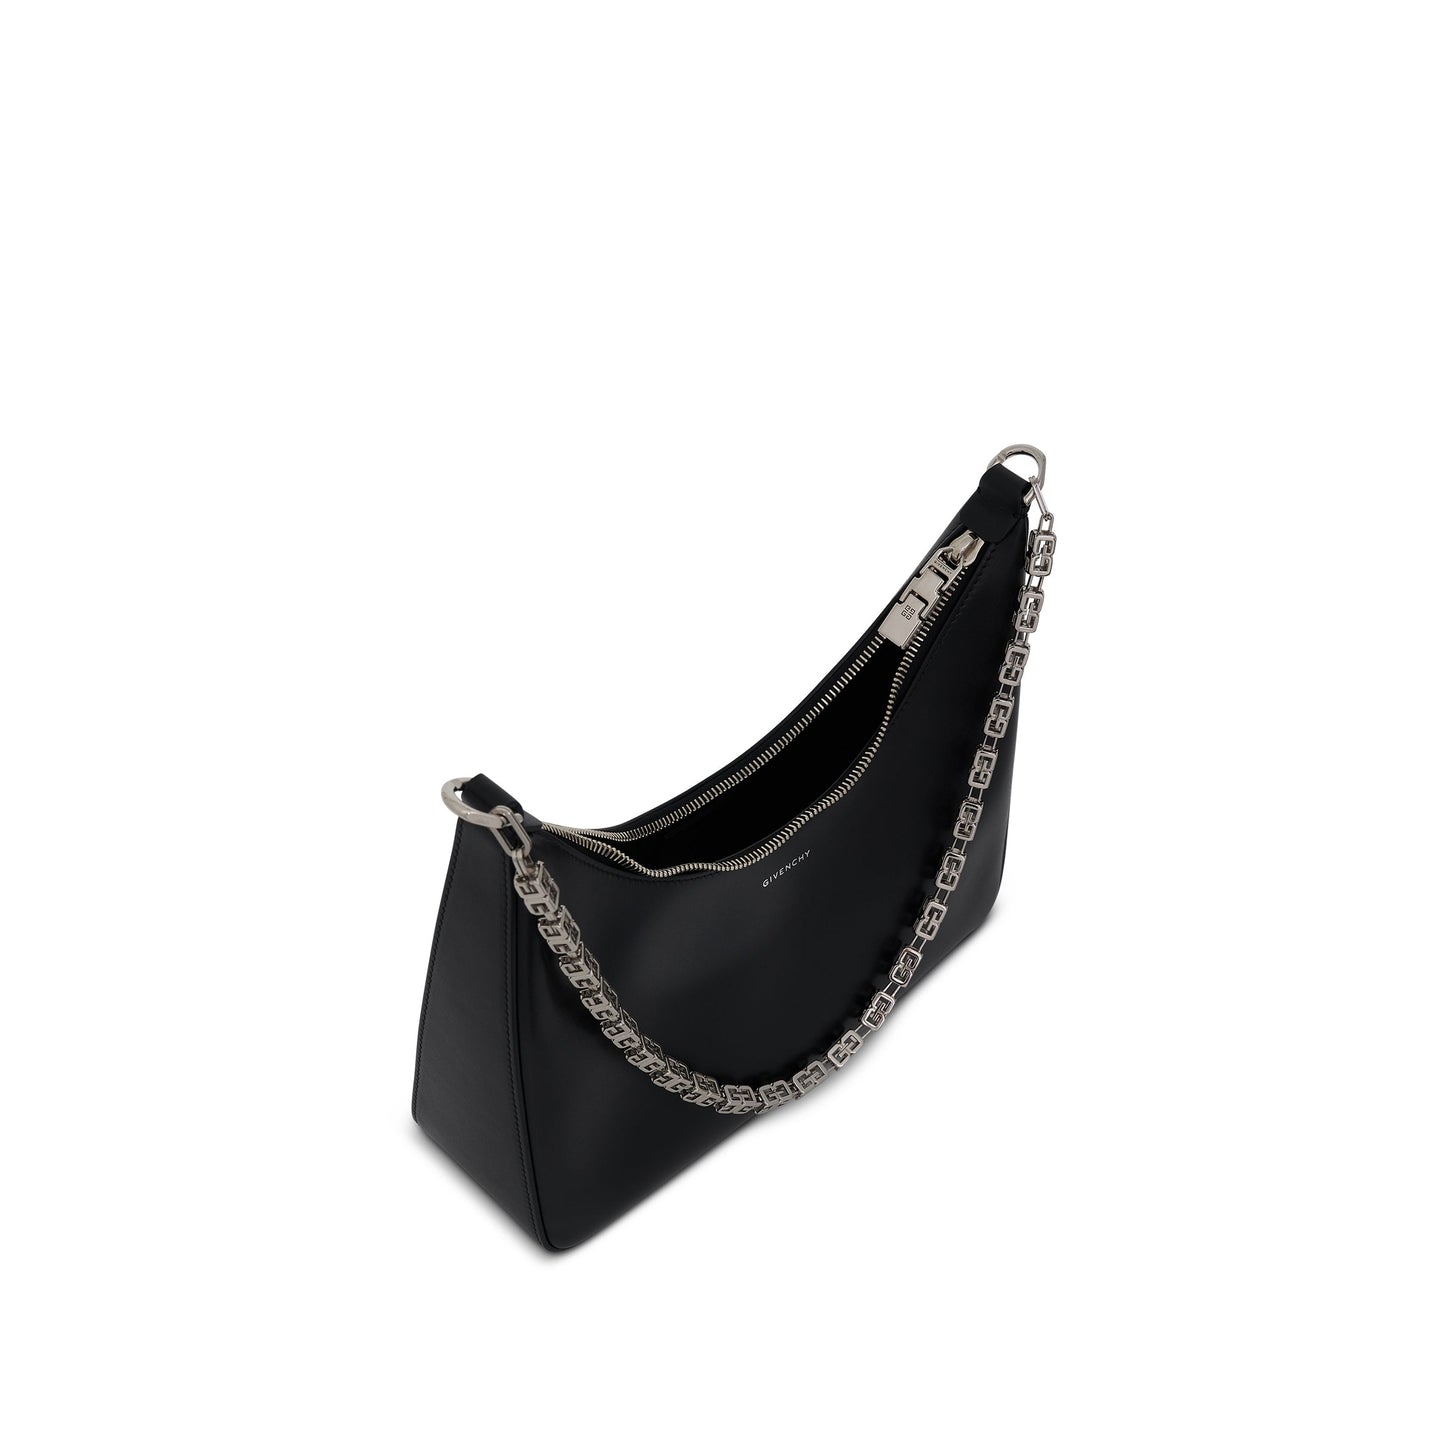 Small Moon Cut Out Bag in Calf Leather in Black